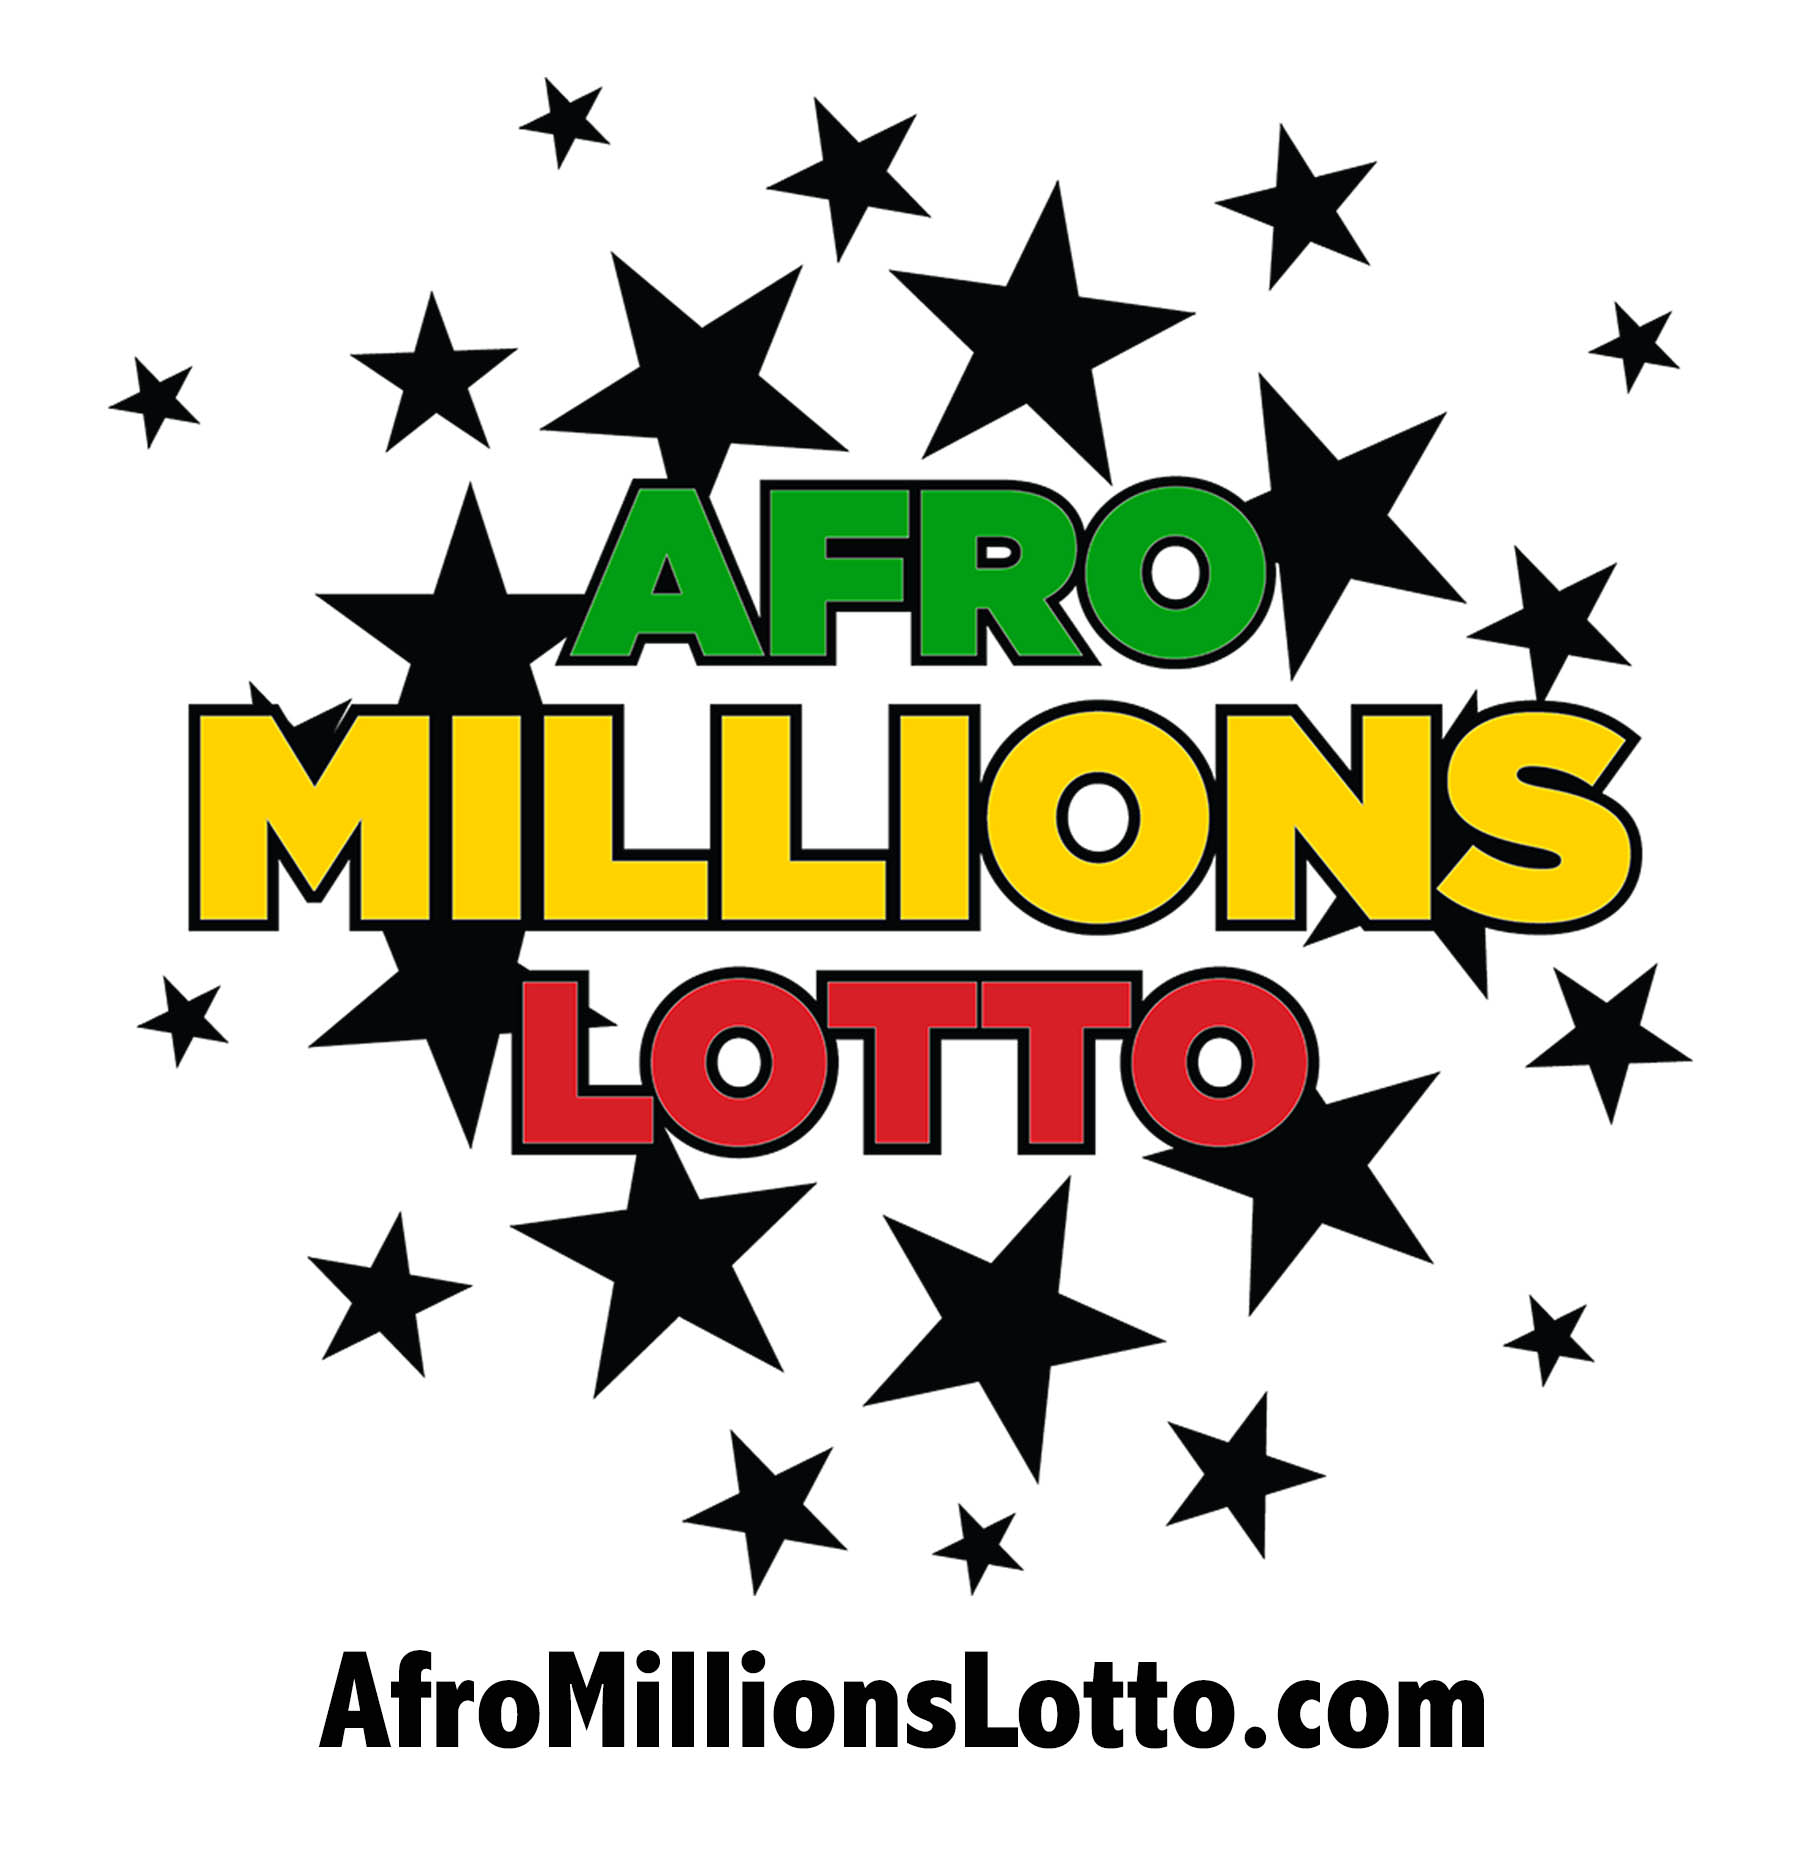 Afro Millions Lotto Woos Nigerians with €5m Jackpot